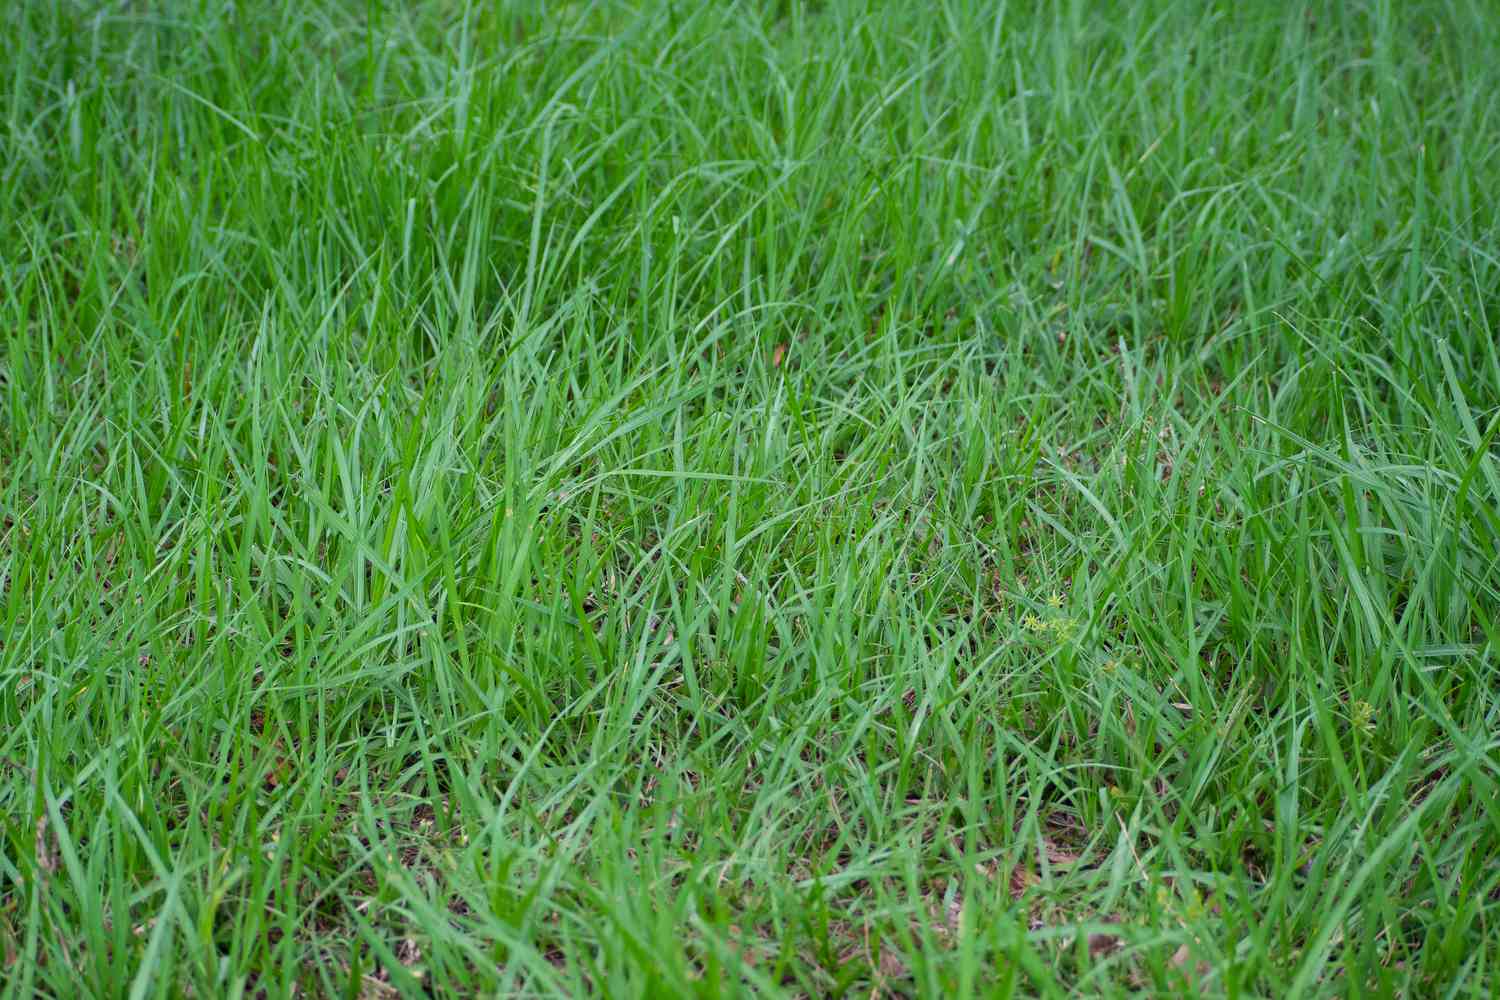 Bahia grass covering lawn with thin and fluffy blades